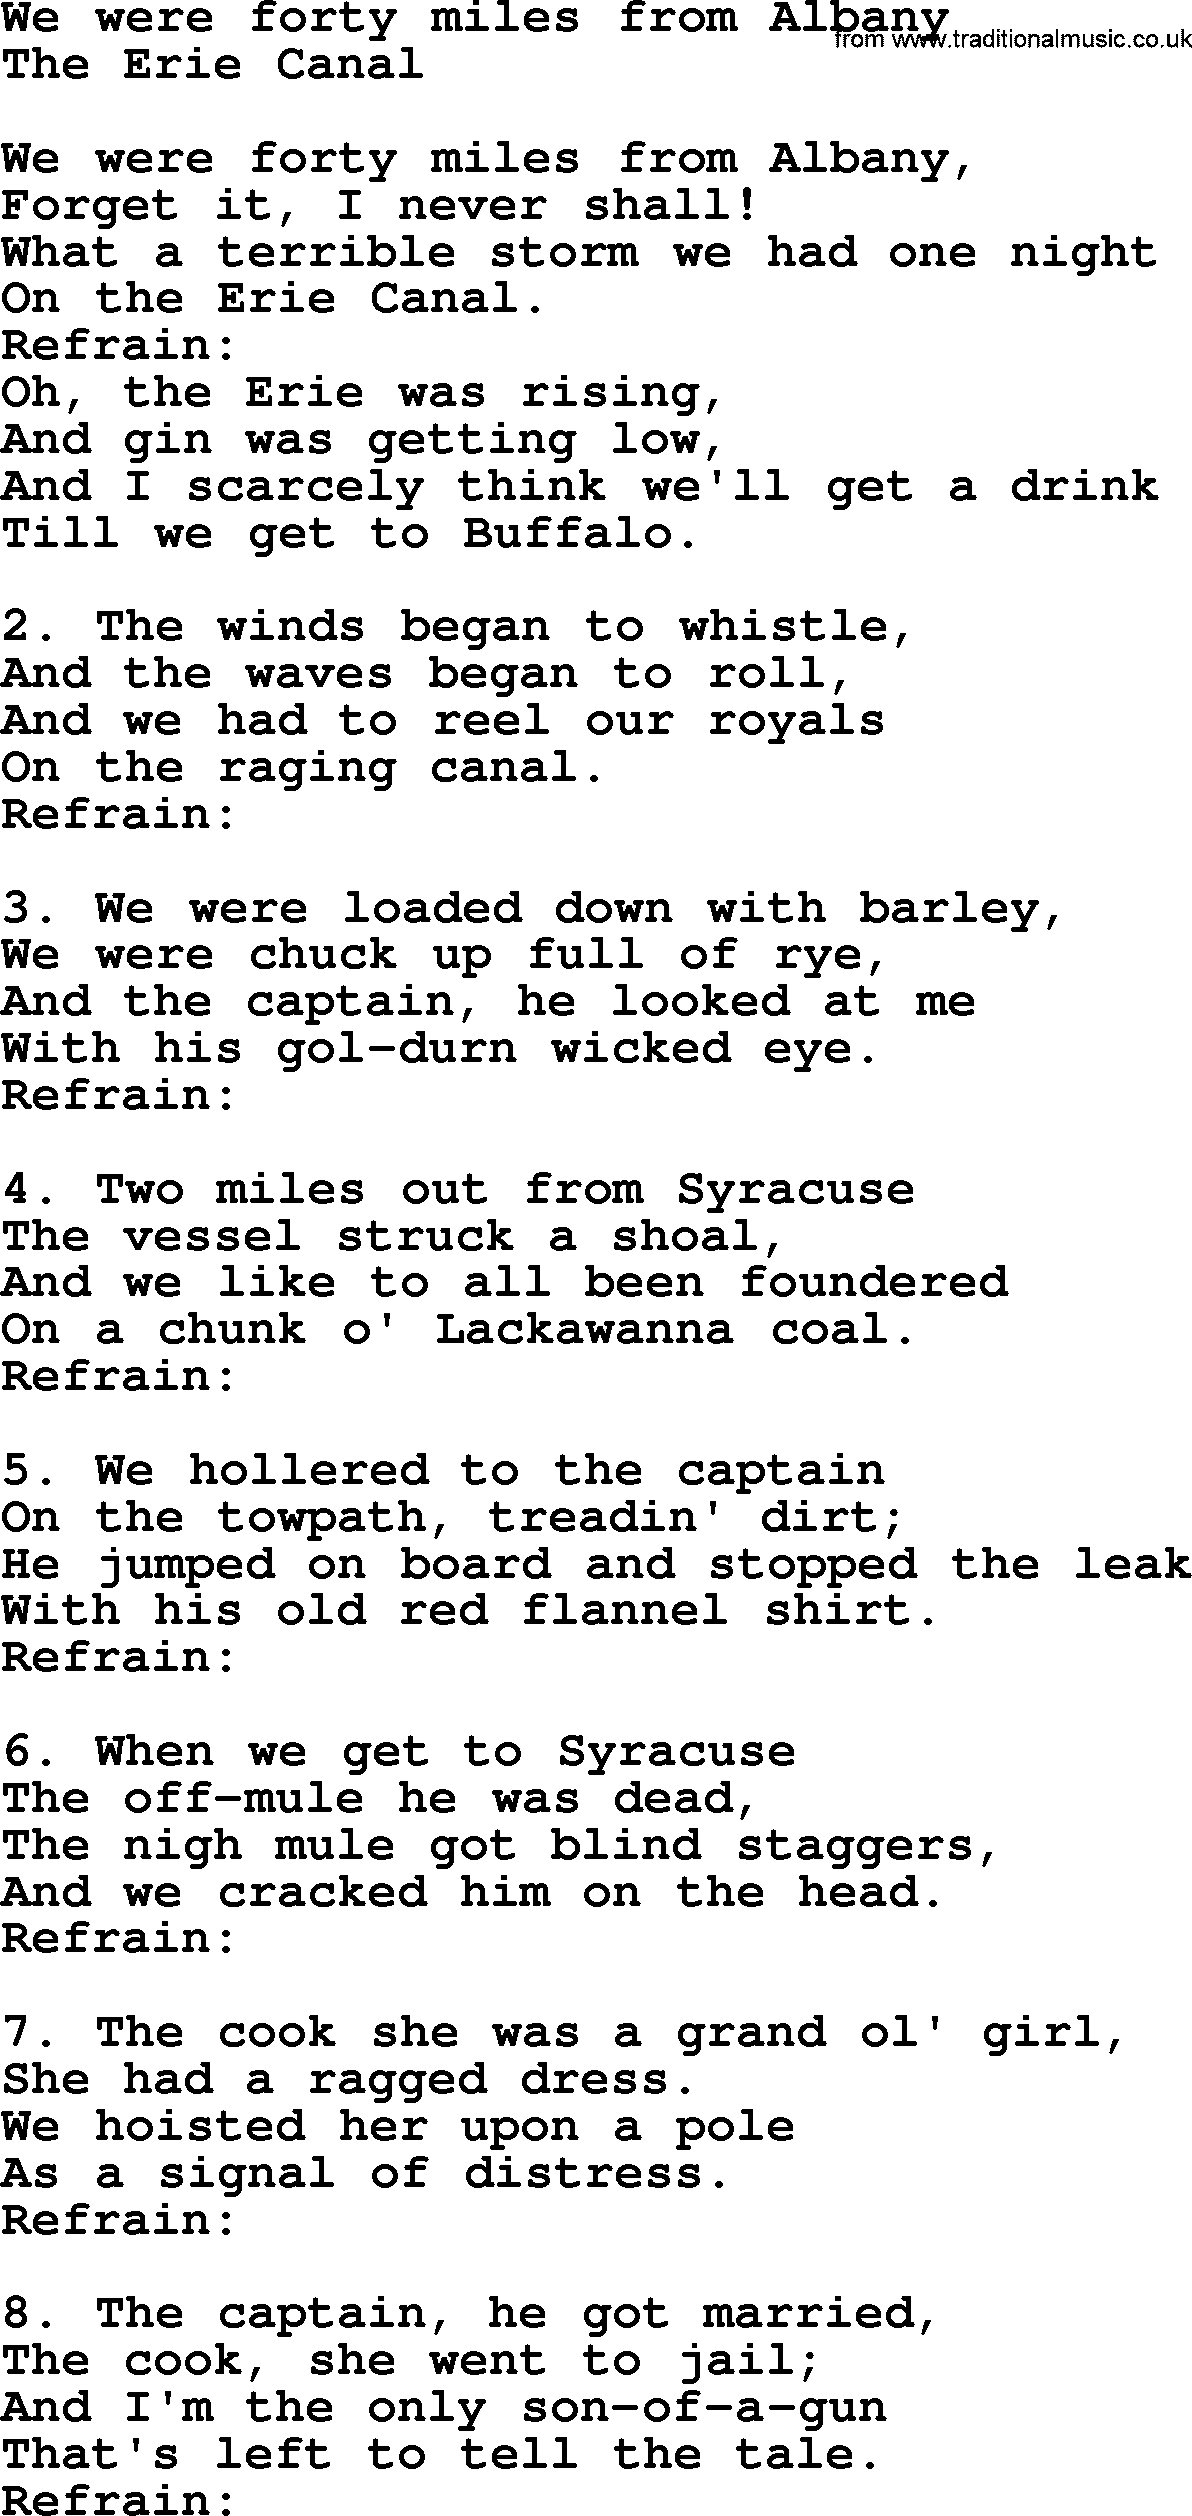 Sea Song or Shantie: We Were Forty Miles From Albany, lyrics